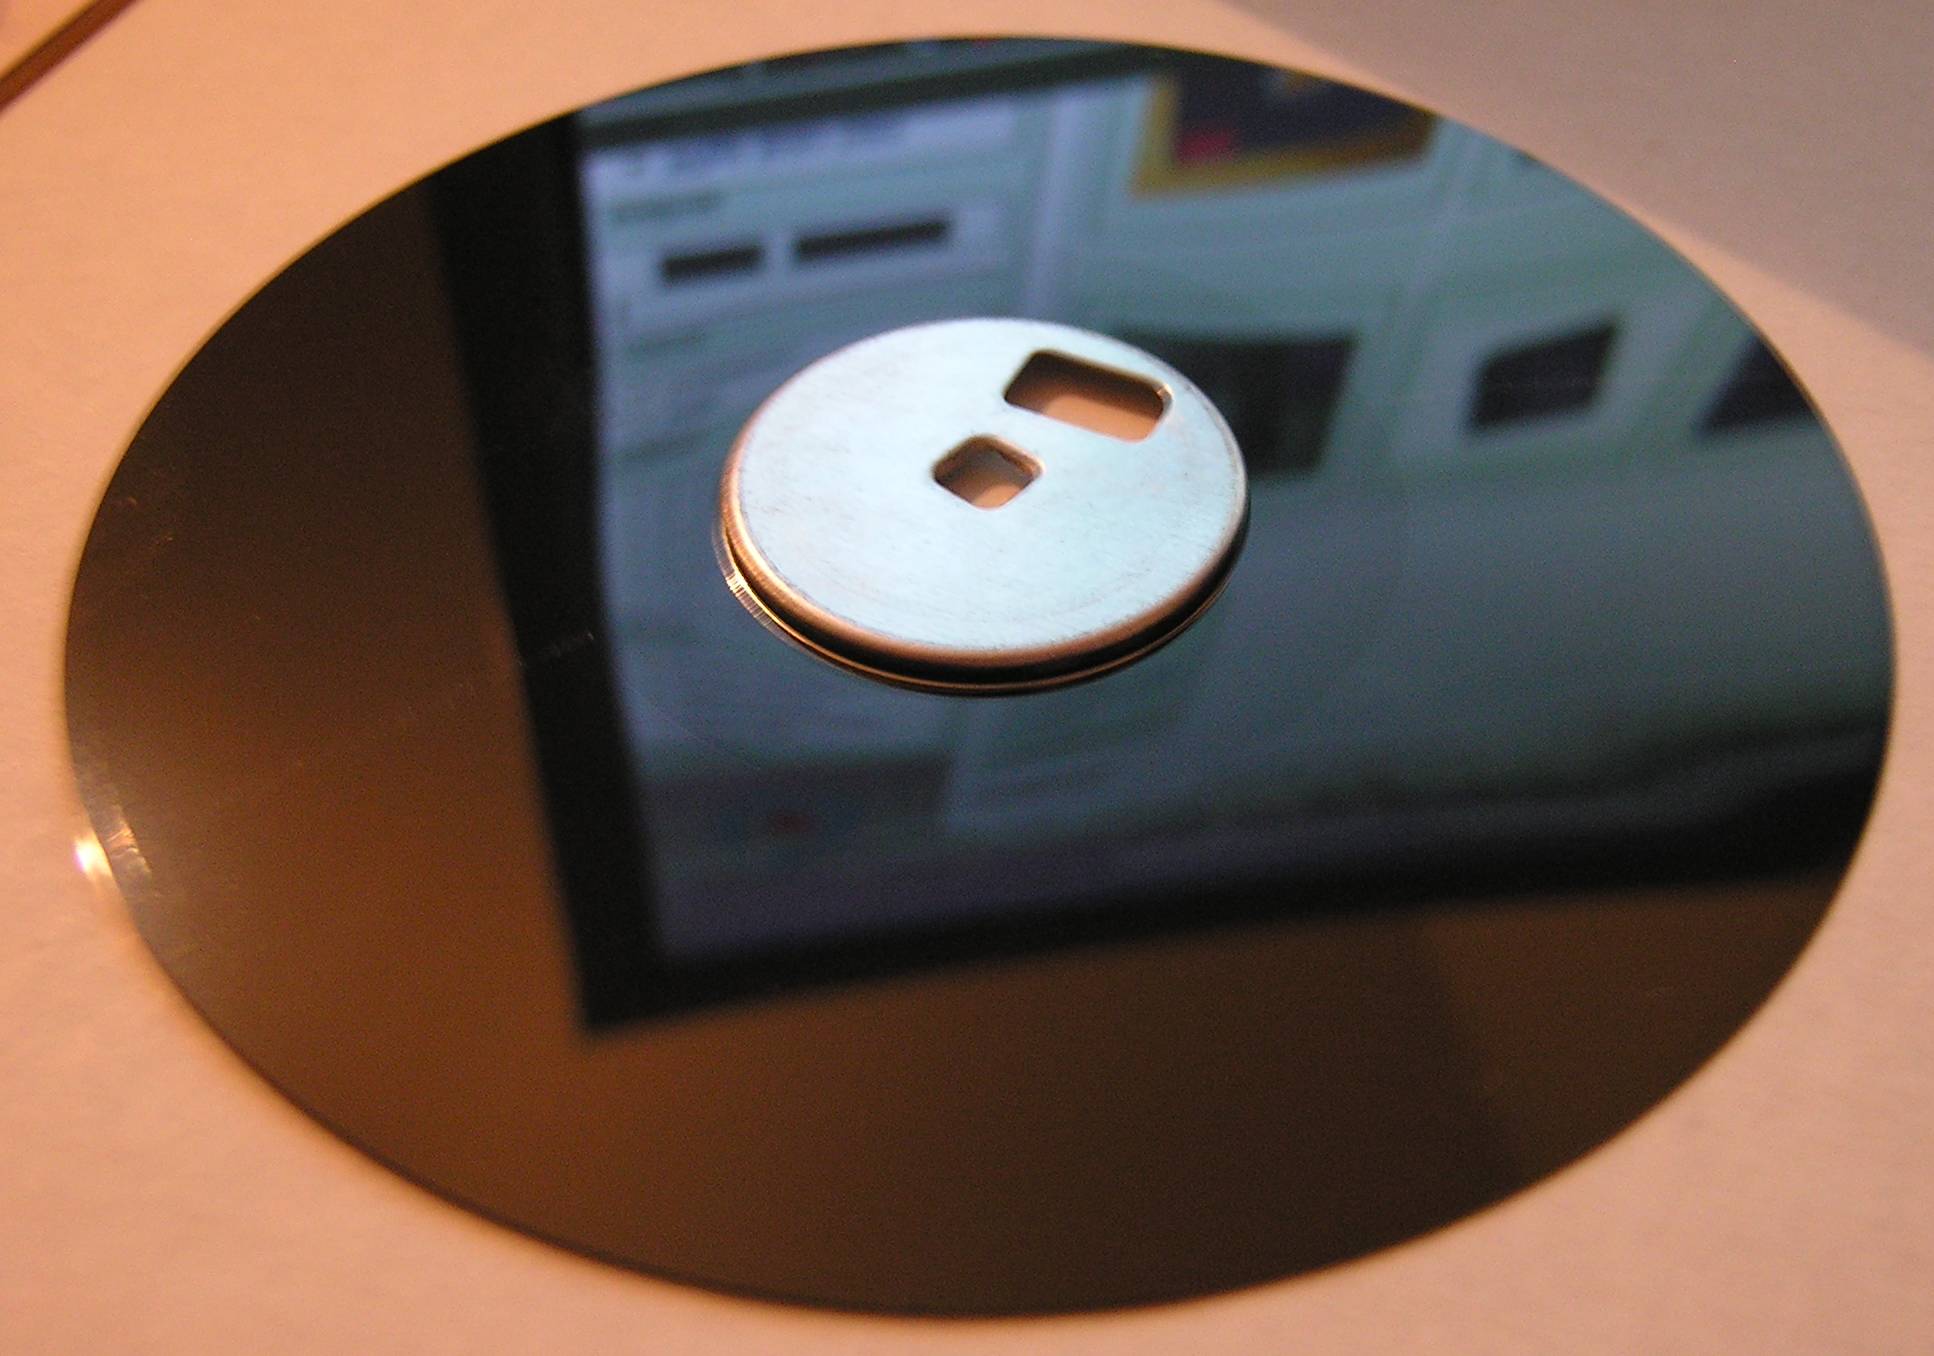 Image3,5''-Diskette_removed magnetic disc